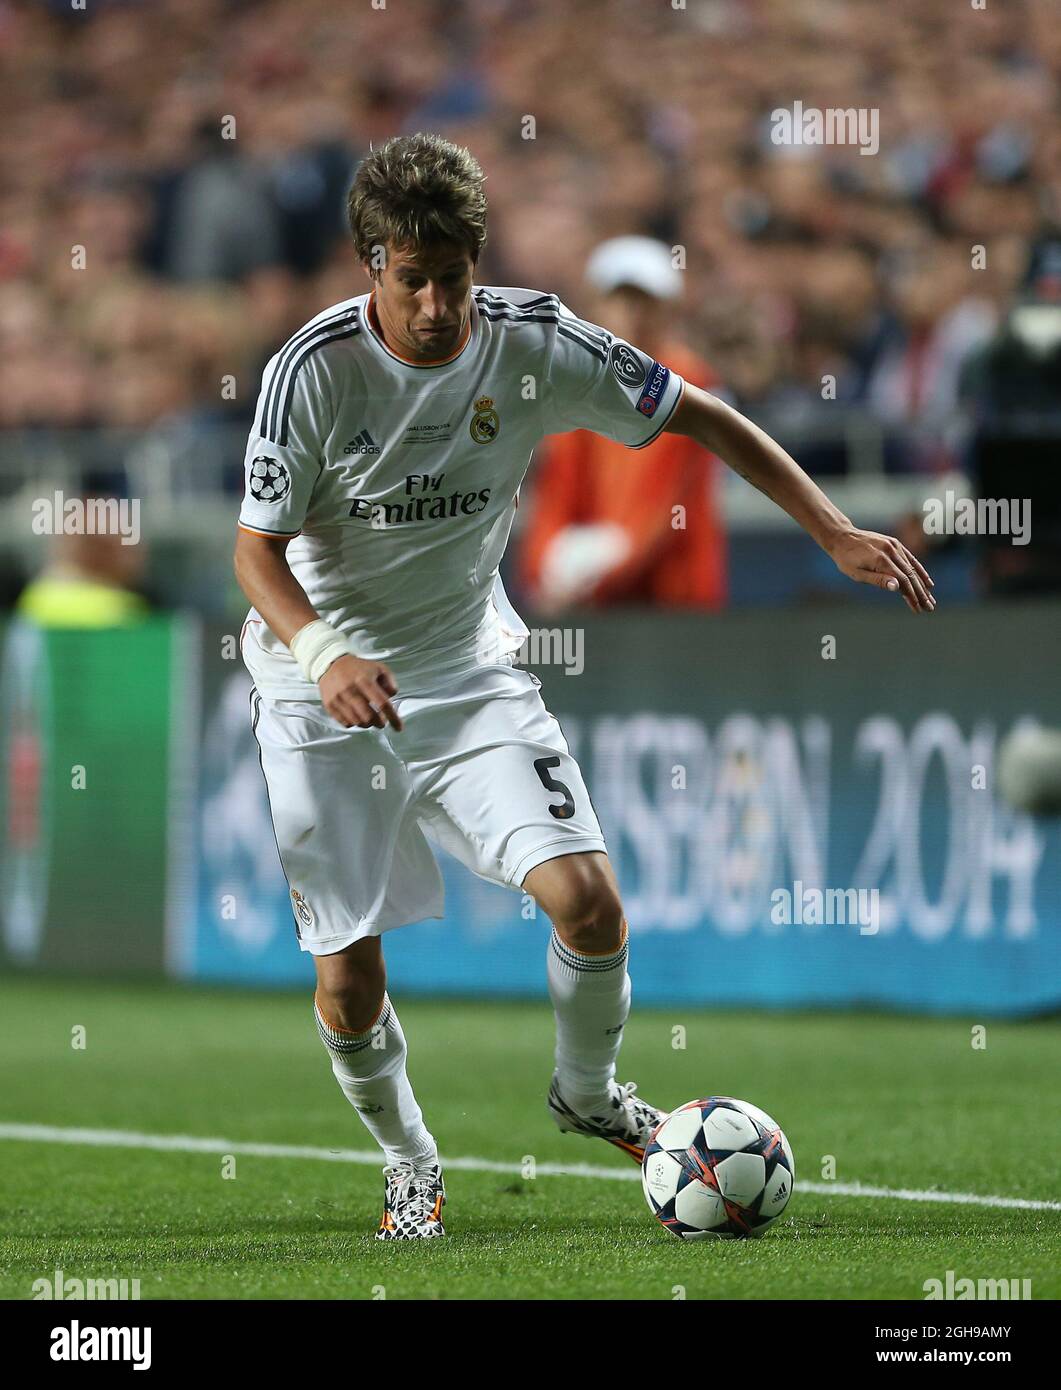 Real Madrid Fabio Coentrao in action during the UEFA Champions League soccer final match between Real Madrid and Atletico Madrid at Estadio da Luz Stadium in Lisbon, Portugal on May 24, 2014. Pictured by David Klein/Sportimage. Stock Photo